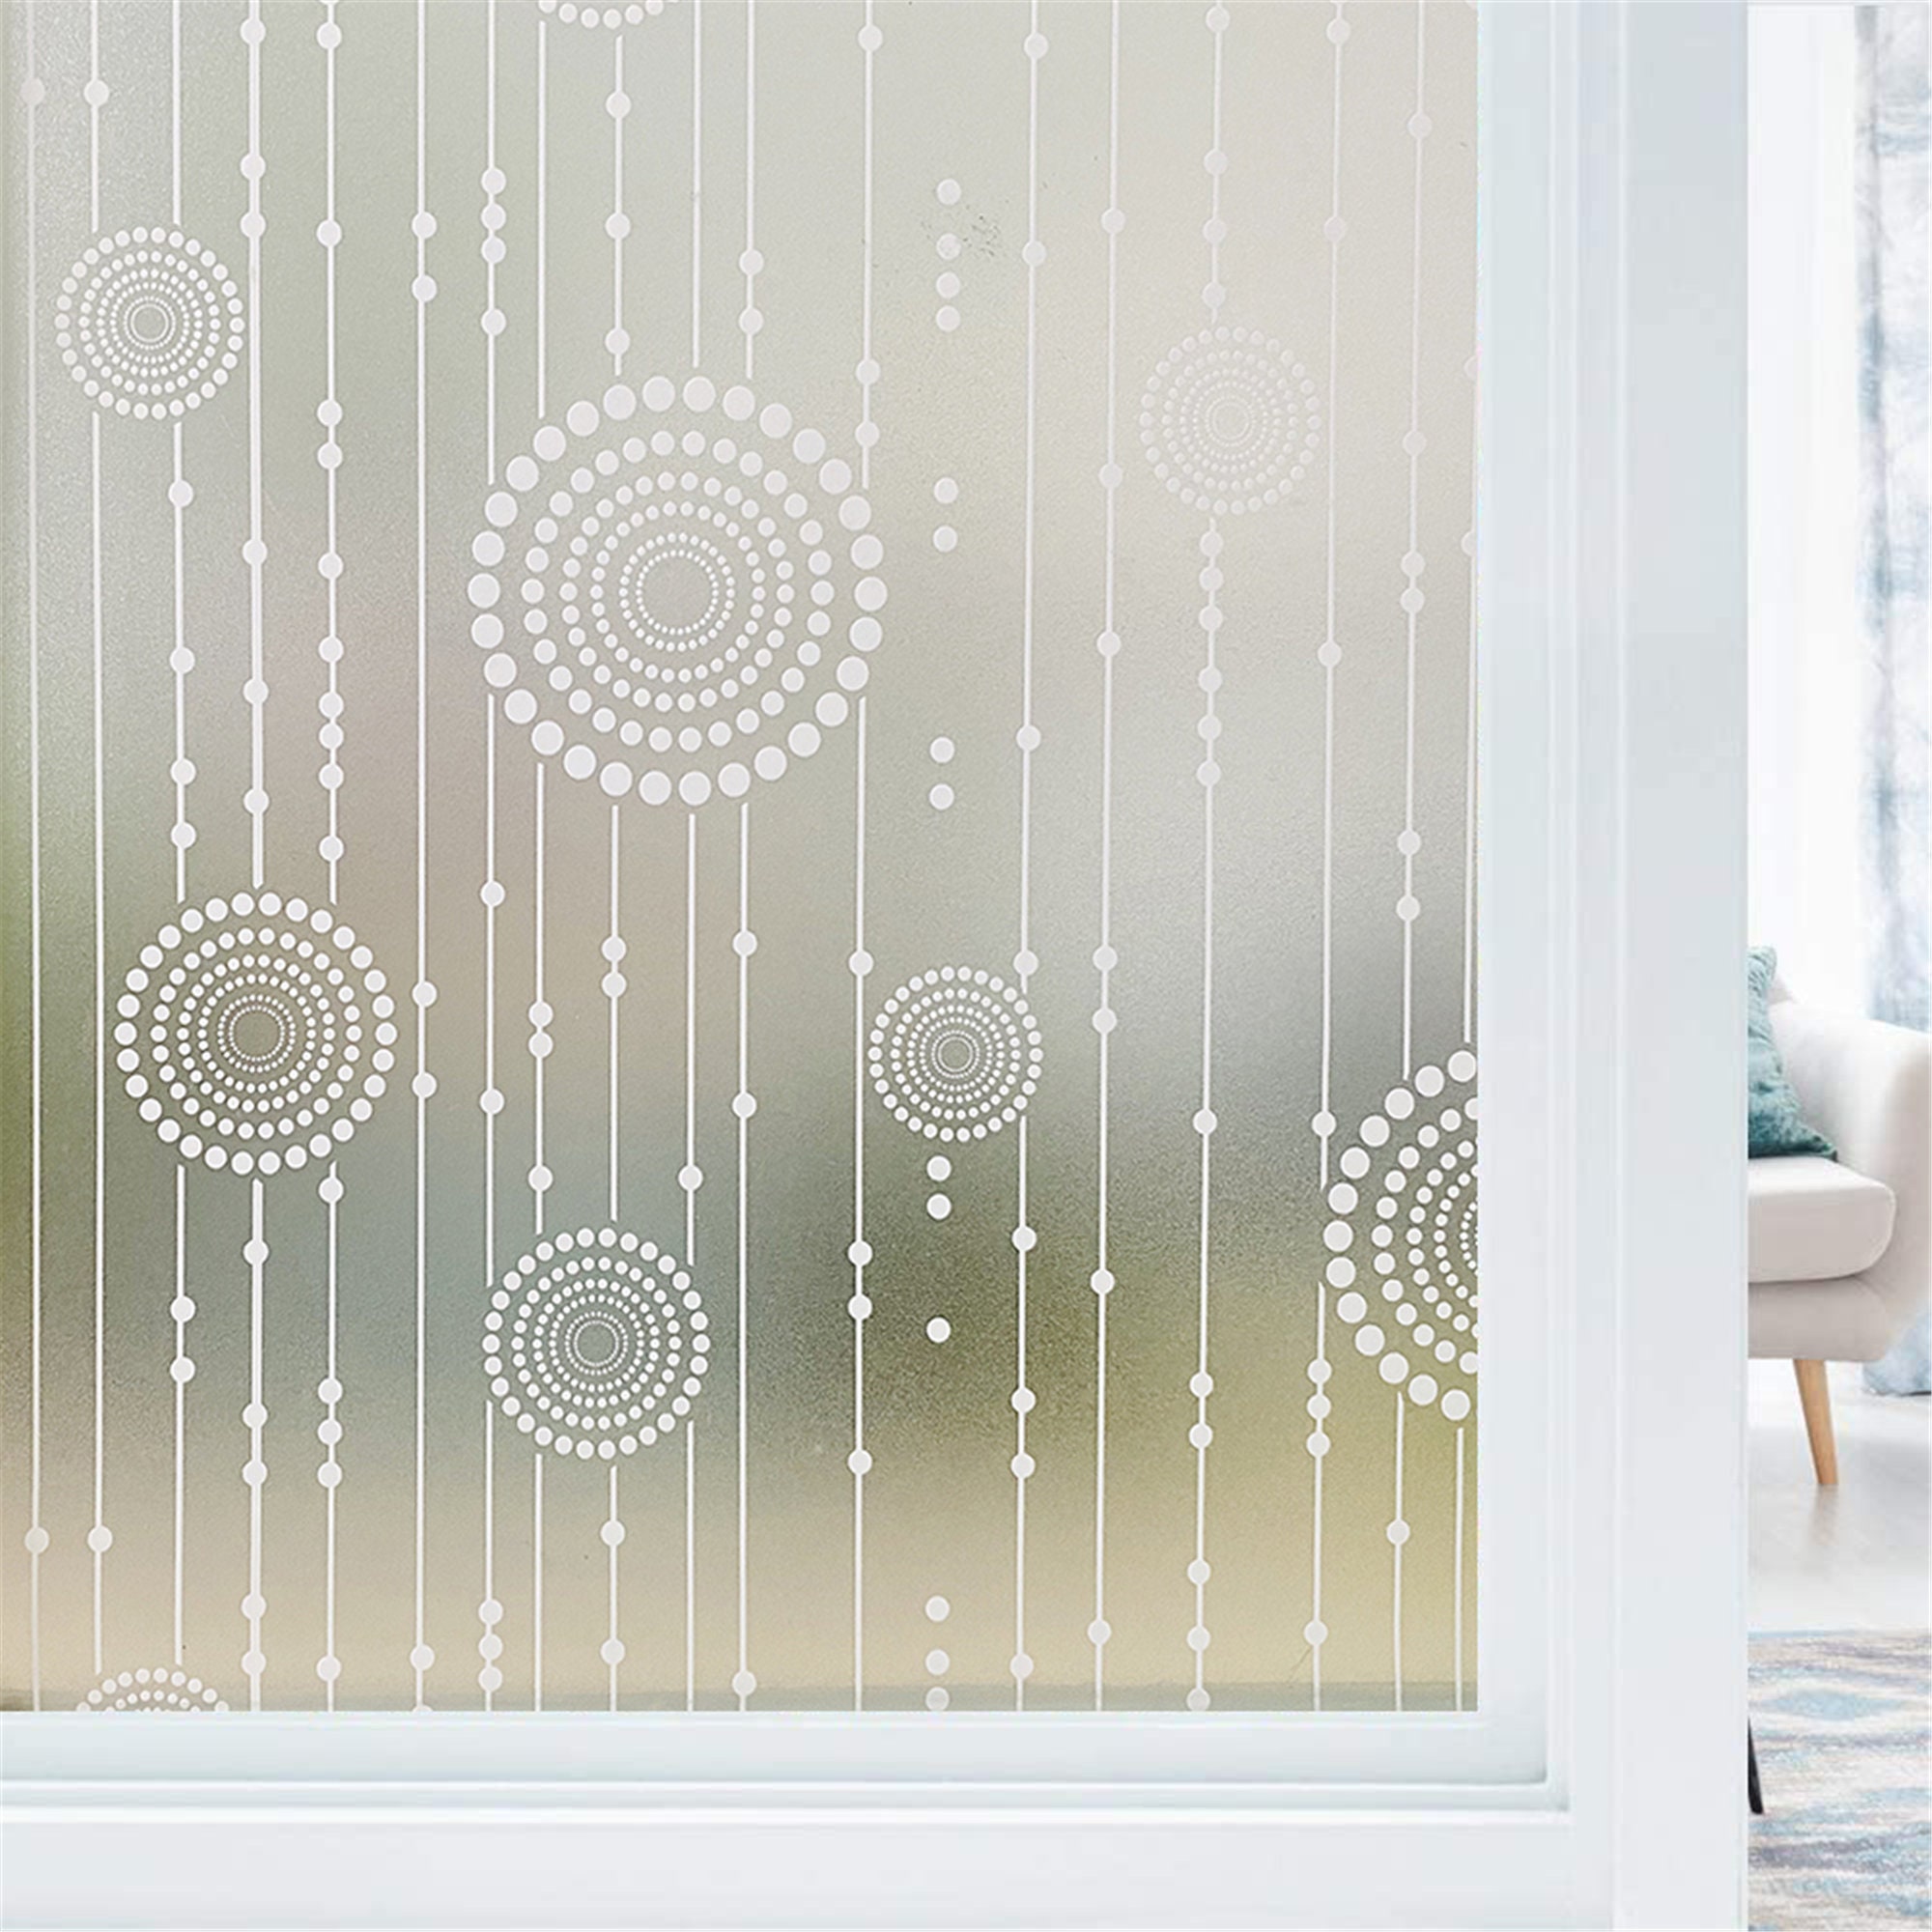 Window Glass Lots Frosted Cover Film Sticker Decor Home 3D Static Cling Privacy 